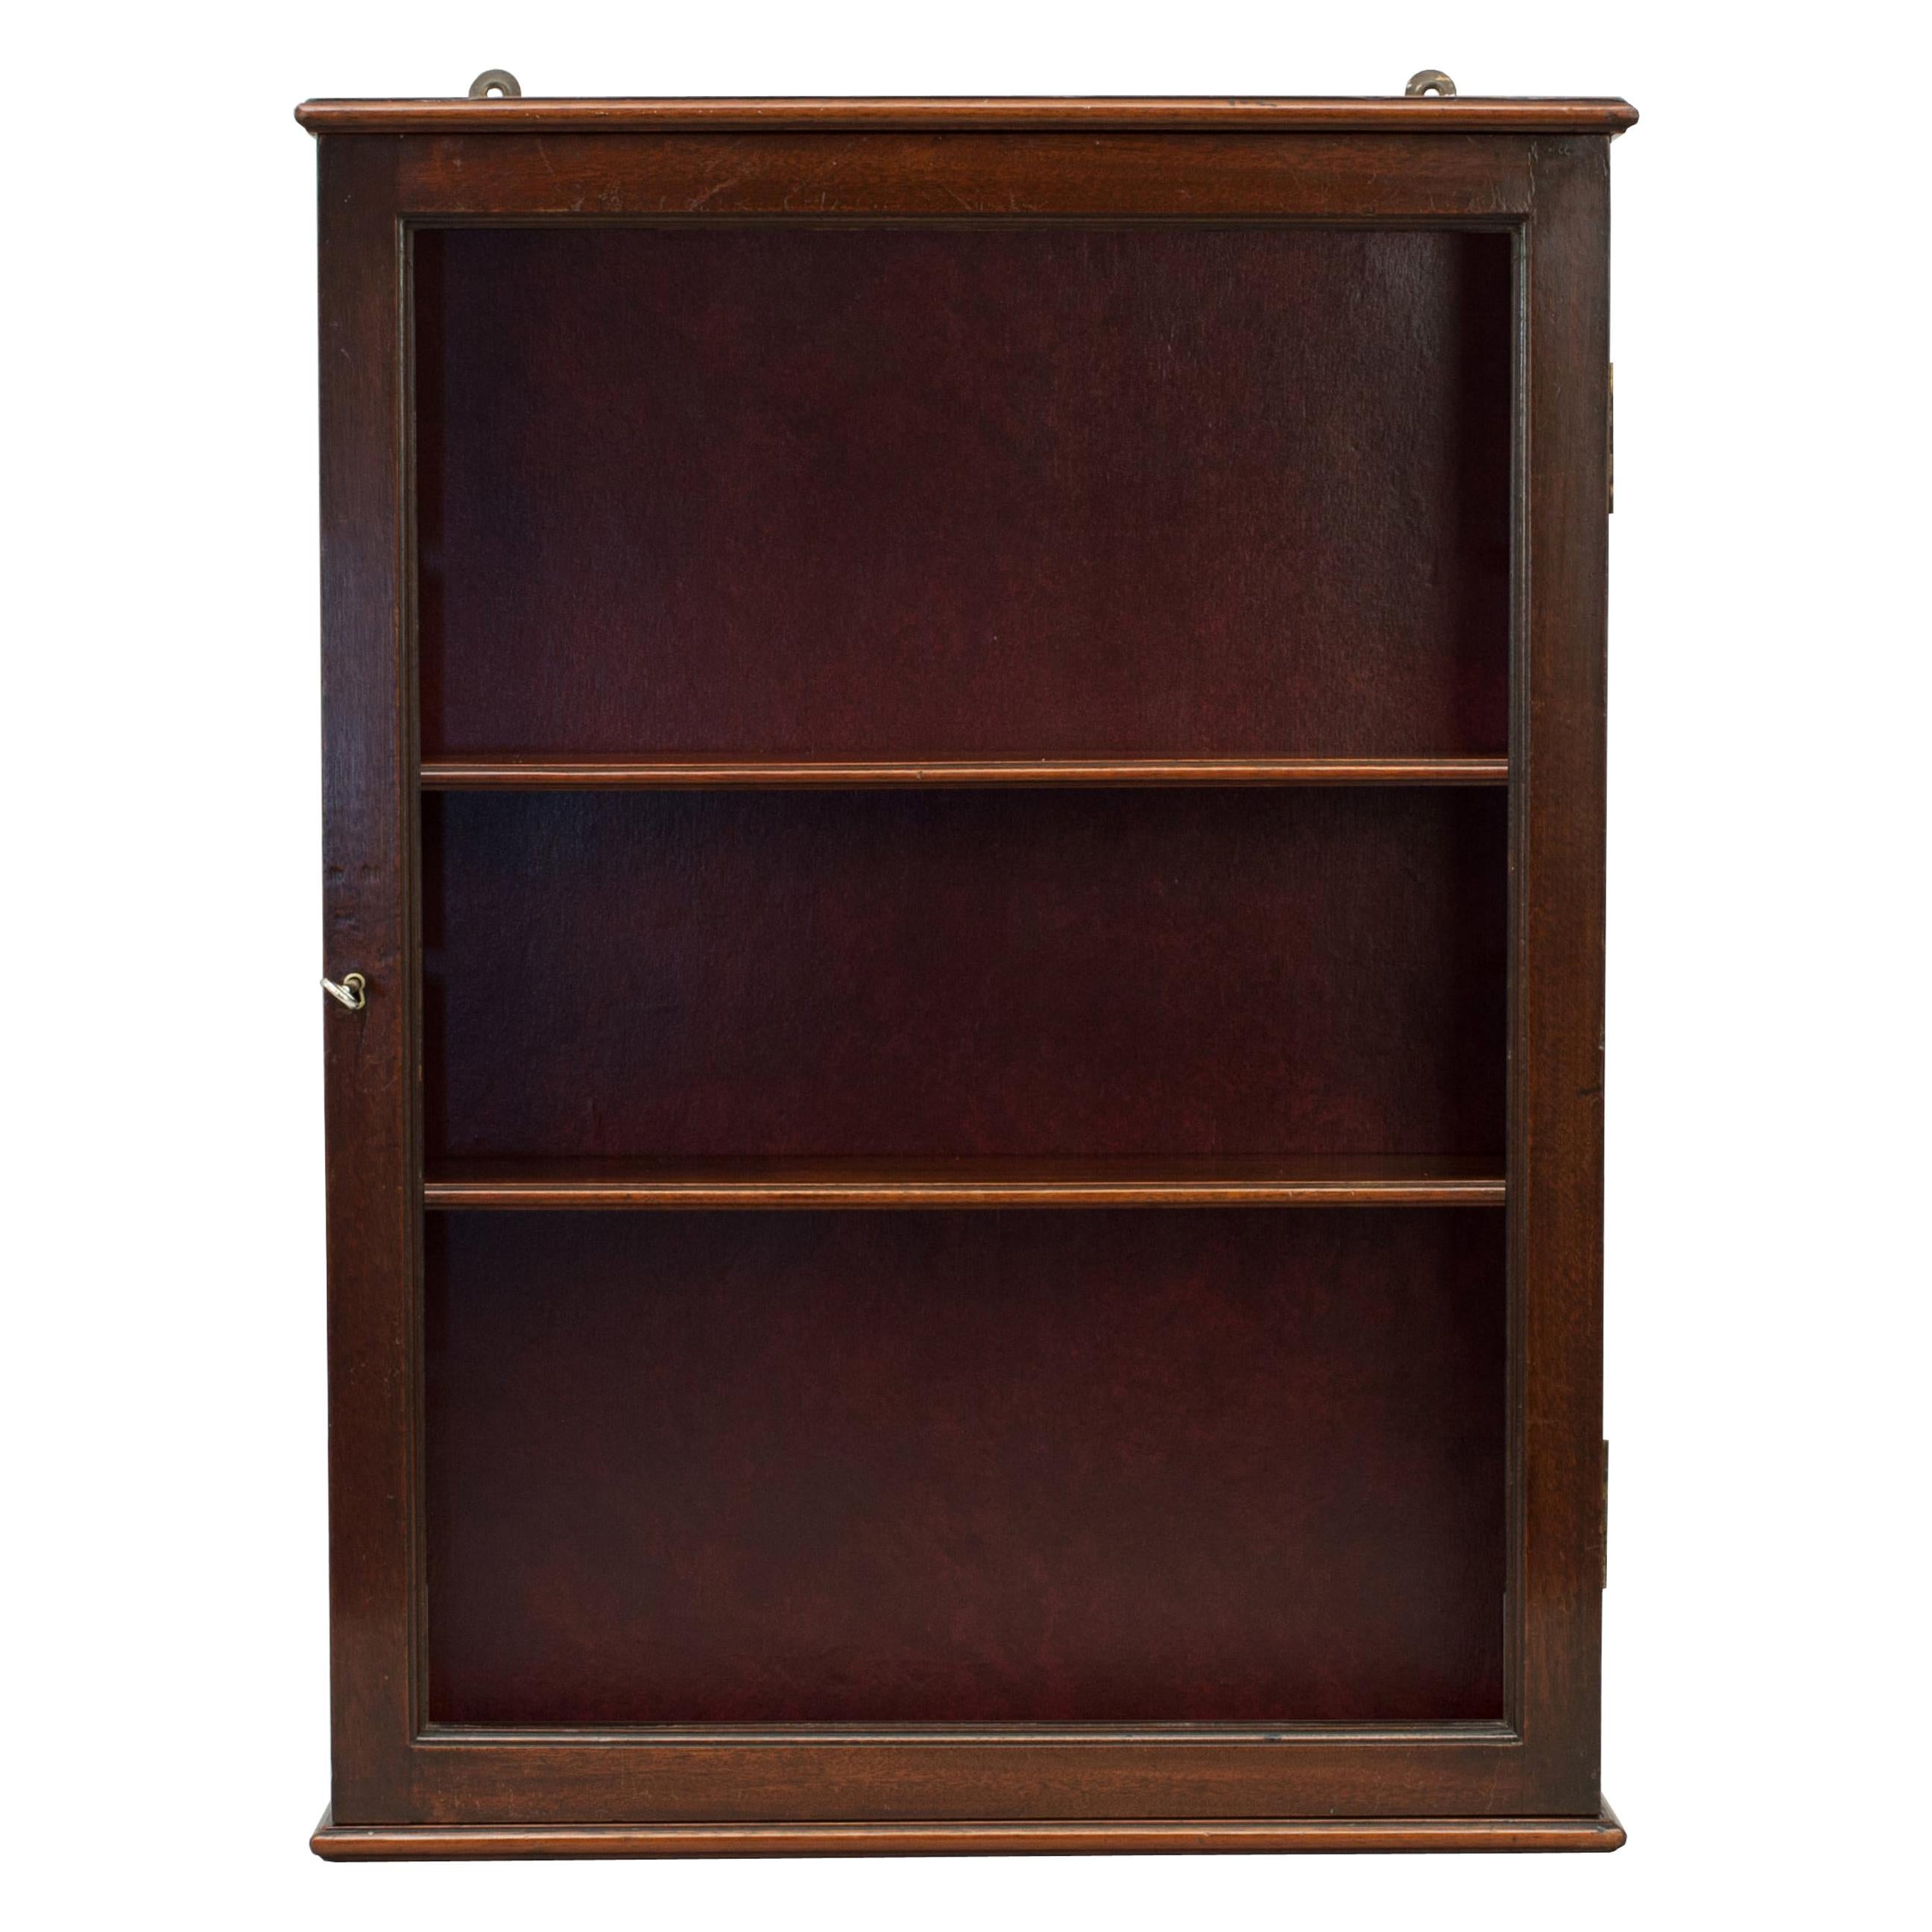 Mahogany Collectors Wall Cabinet with Glass Door